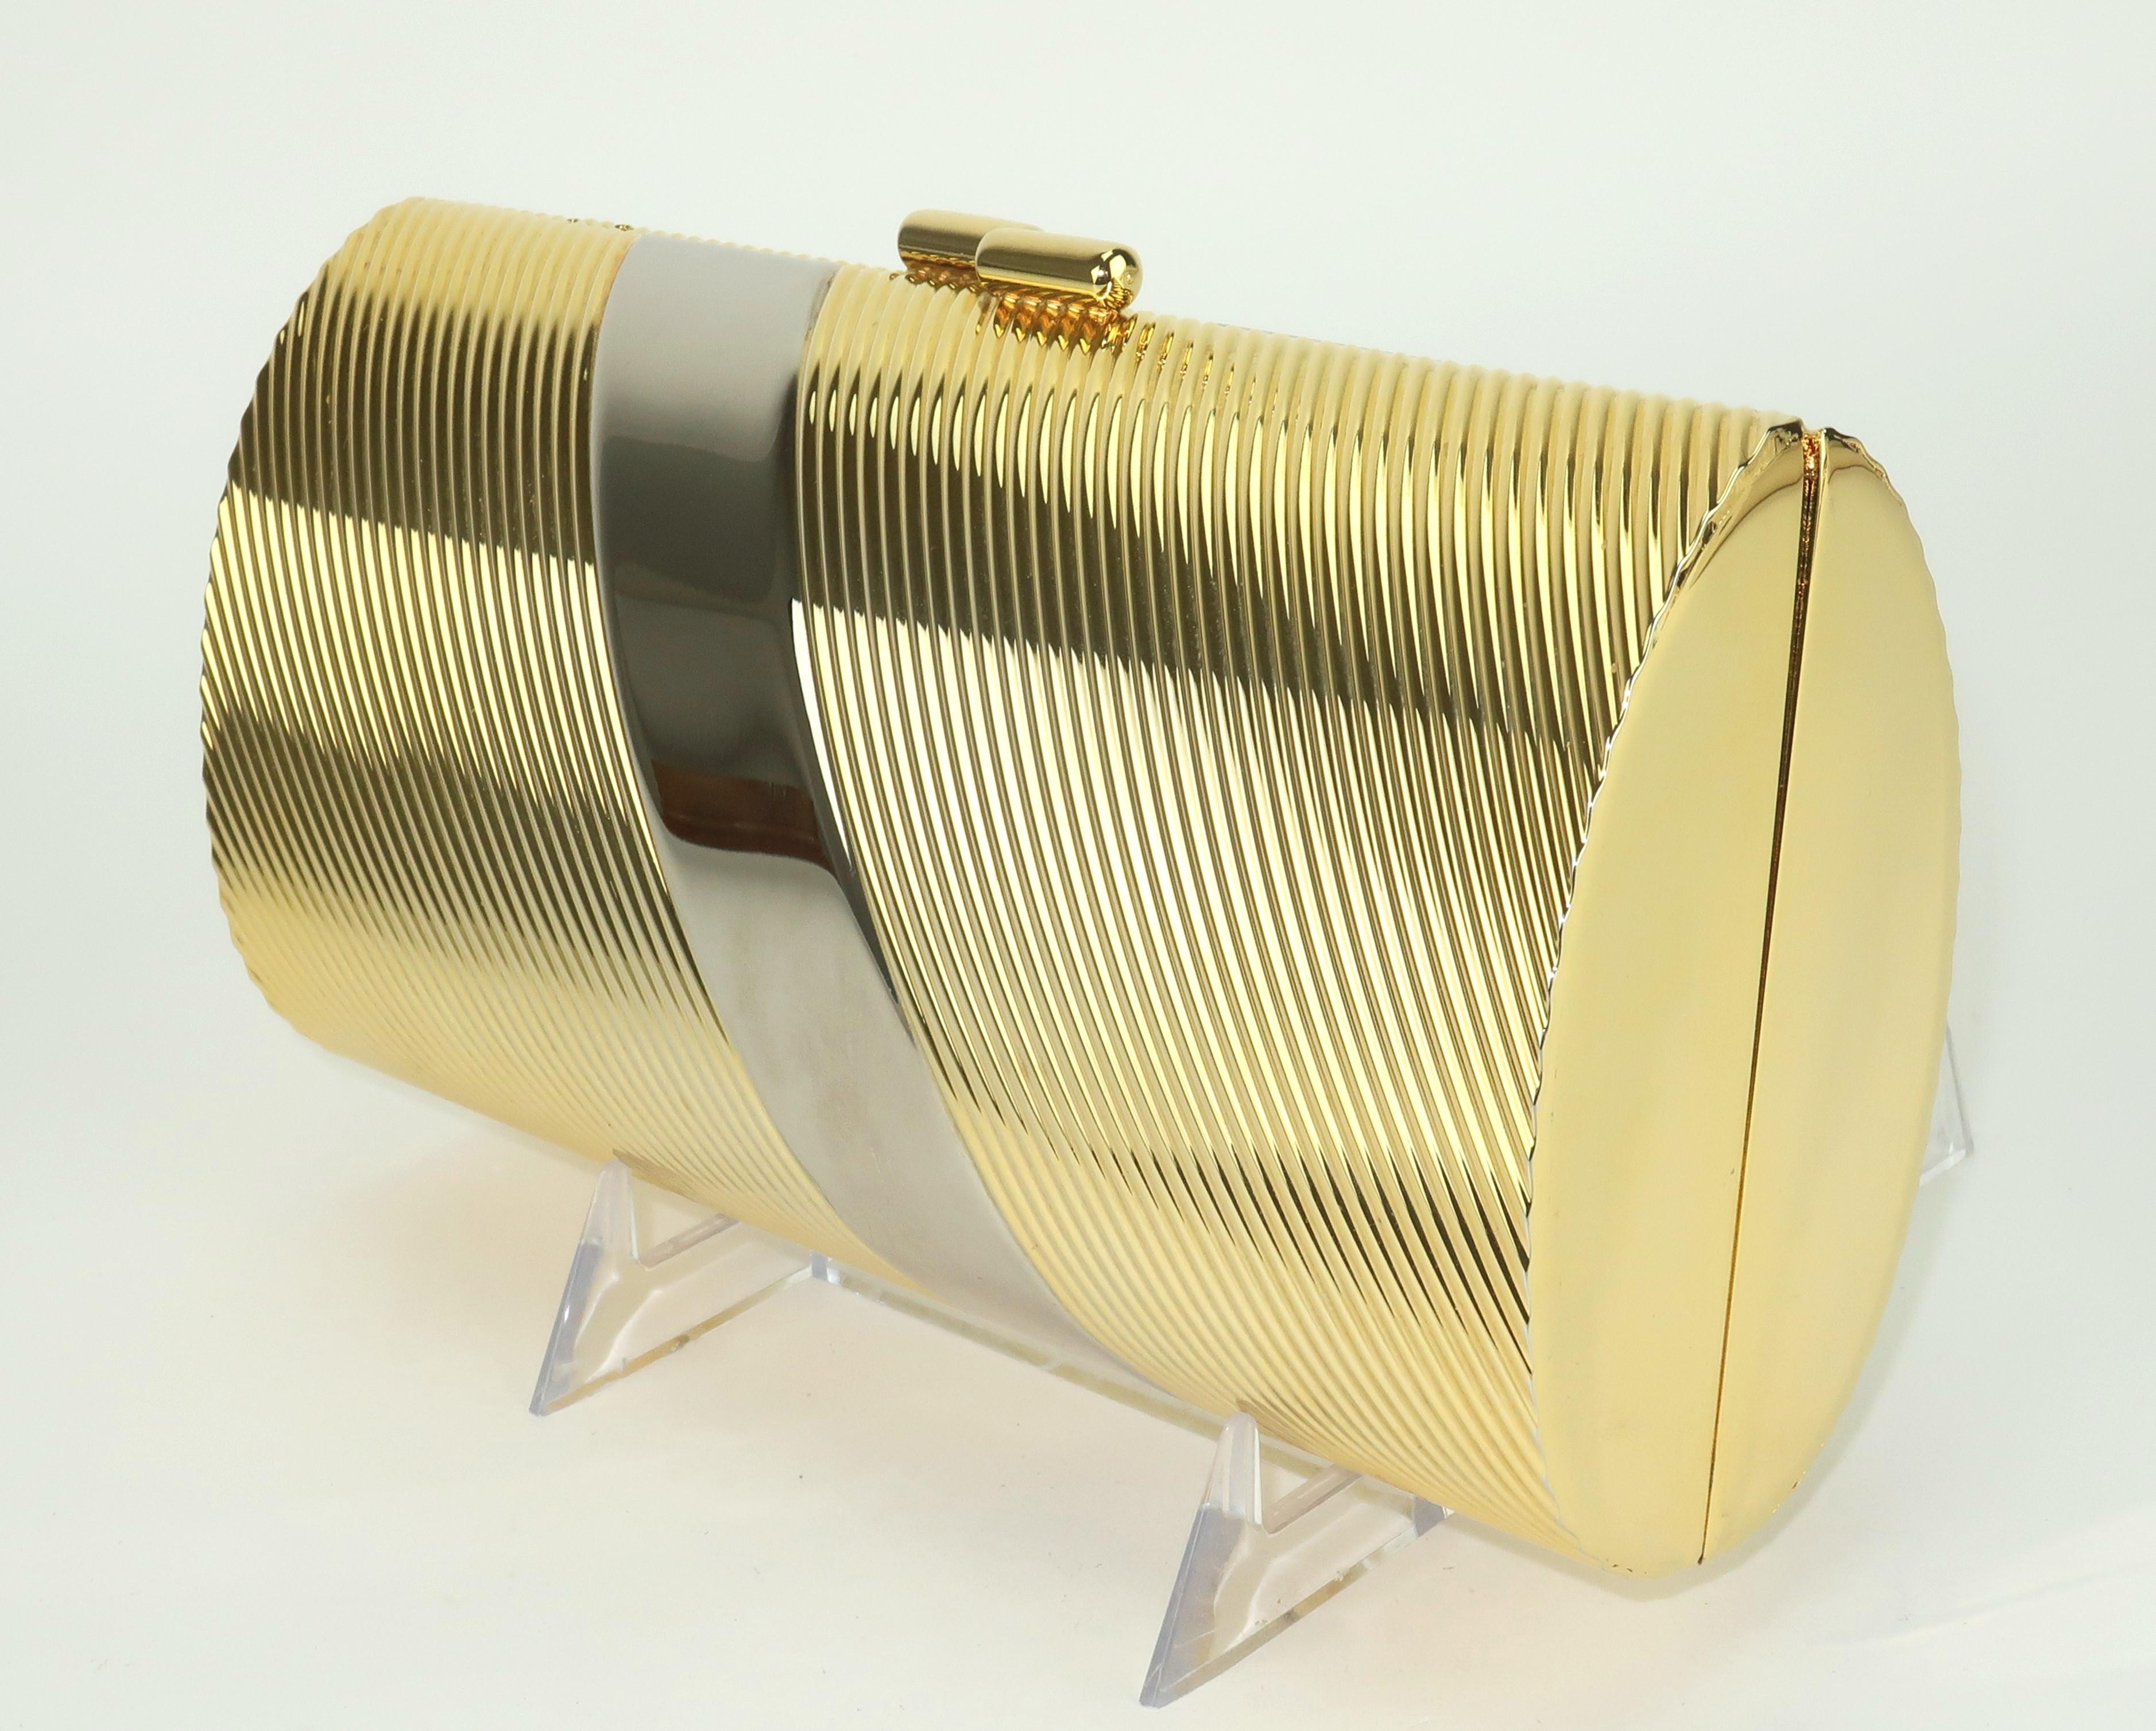 This 1980's Neiman Marcus handbag is a precious bauble, as fun to display as it is to carry.  The gold metal cylinder shape has fluted sides and a silver band at the diagonal for a stylish touch.  The jewelry-like braided chain shoulder strap is